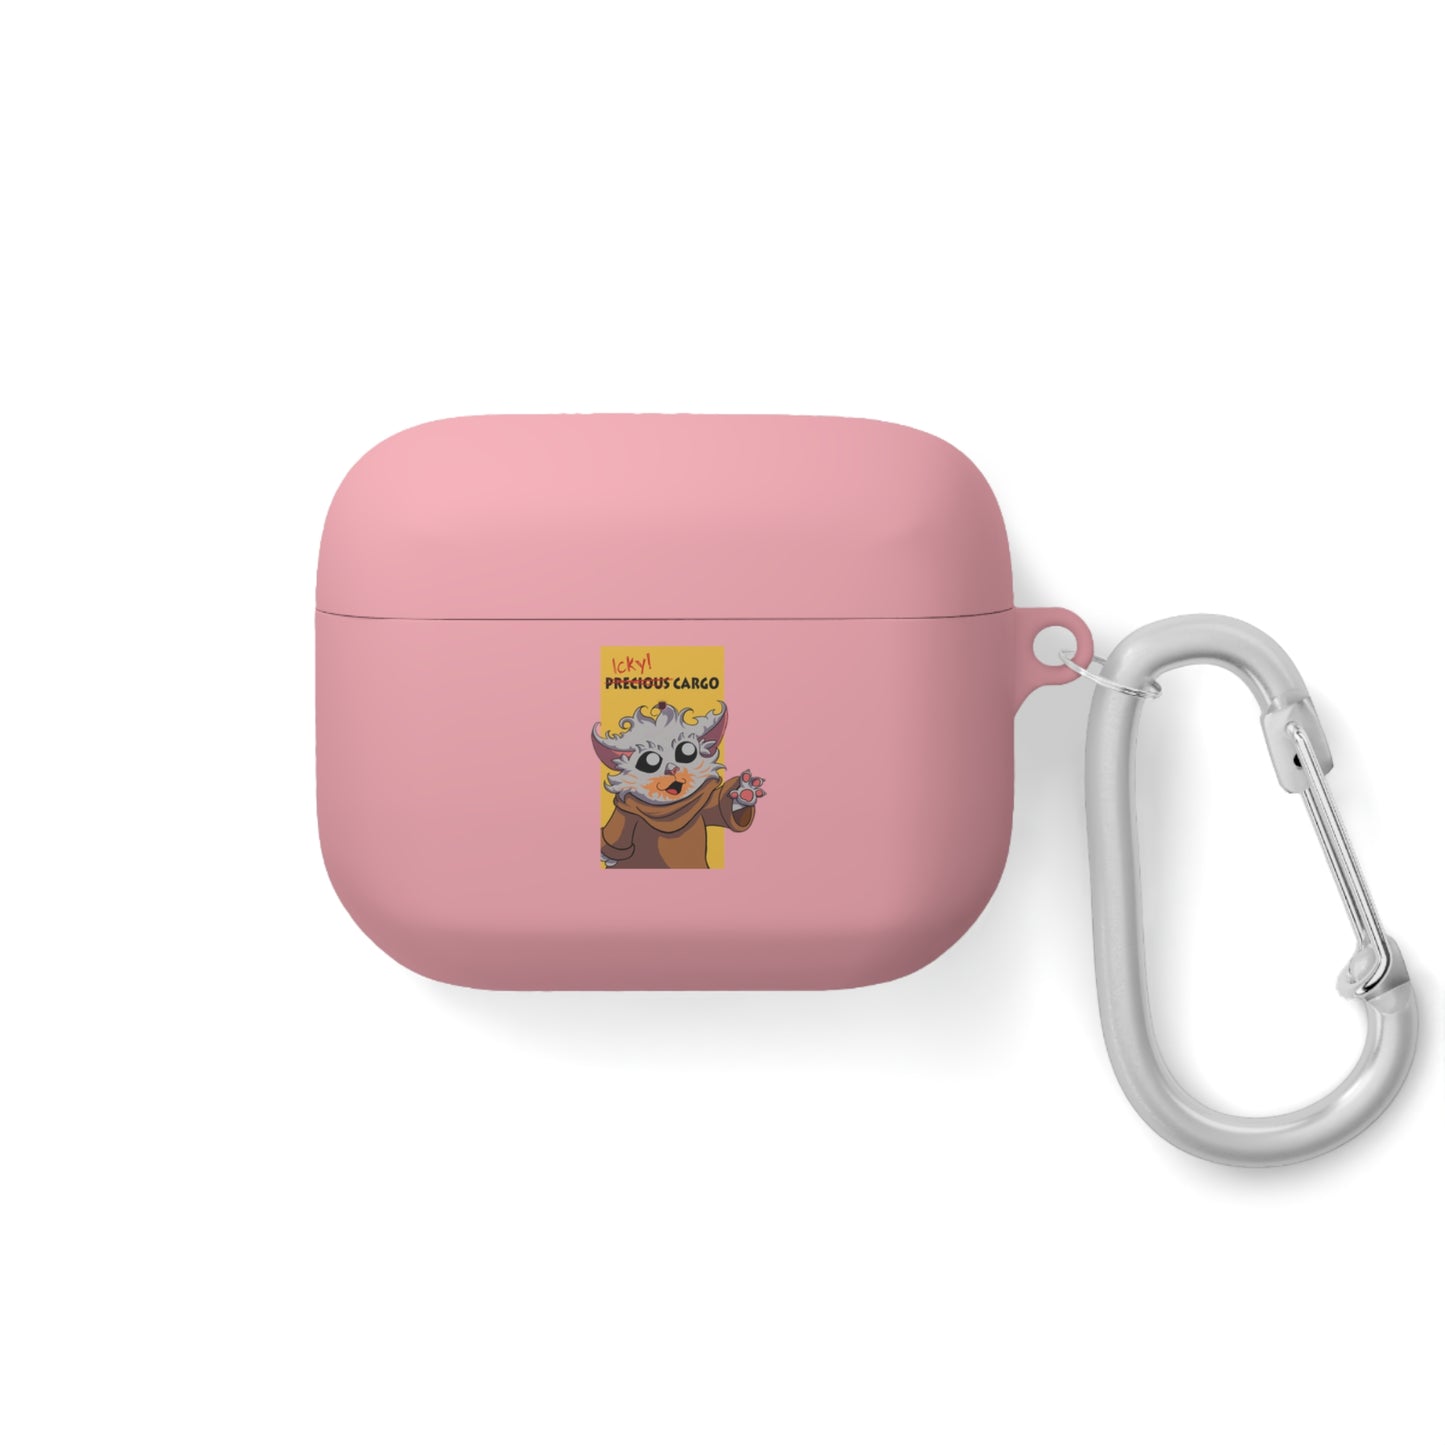 Icky Cargo AirPods / AirPods Pro Case Cover - Wisp Campaign